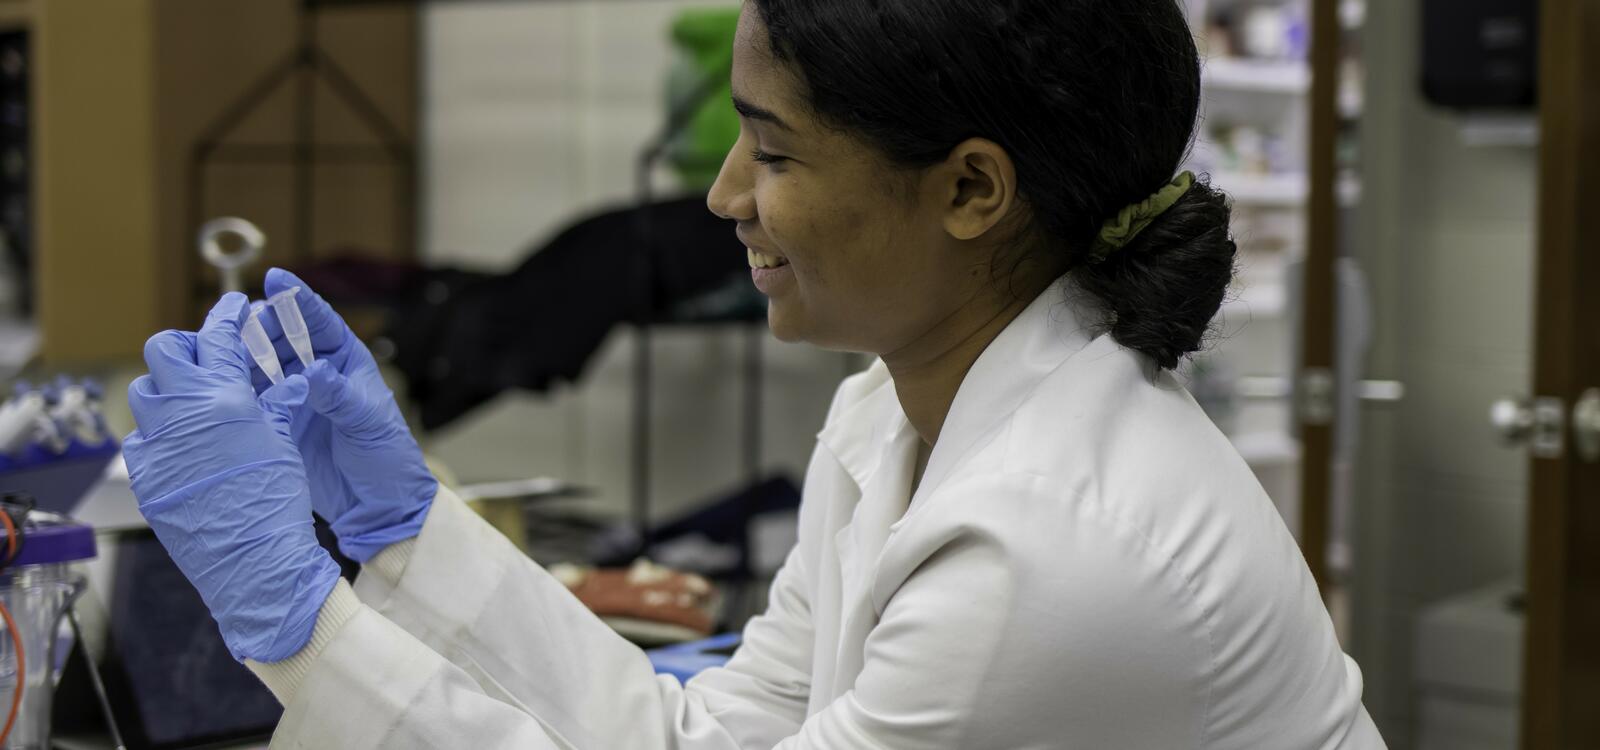 While wearing blue gloves and a lab coat, a student smiles as she picks up two lab tools and observes them